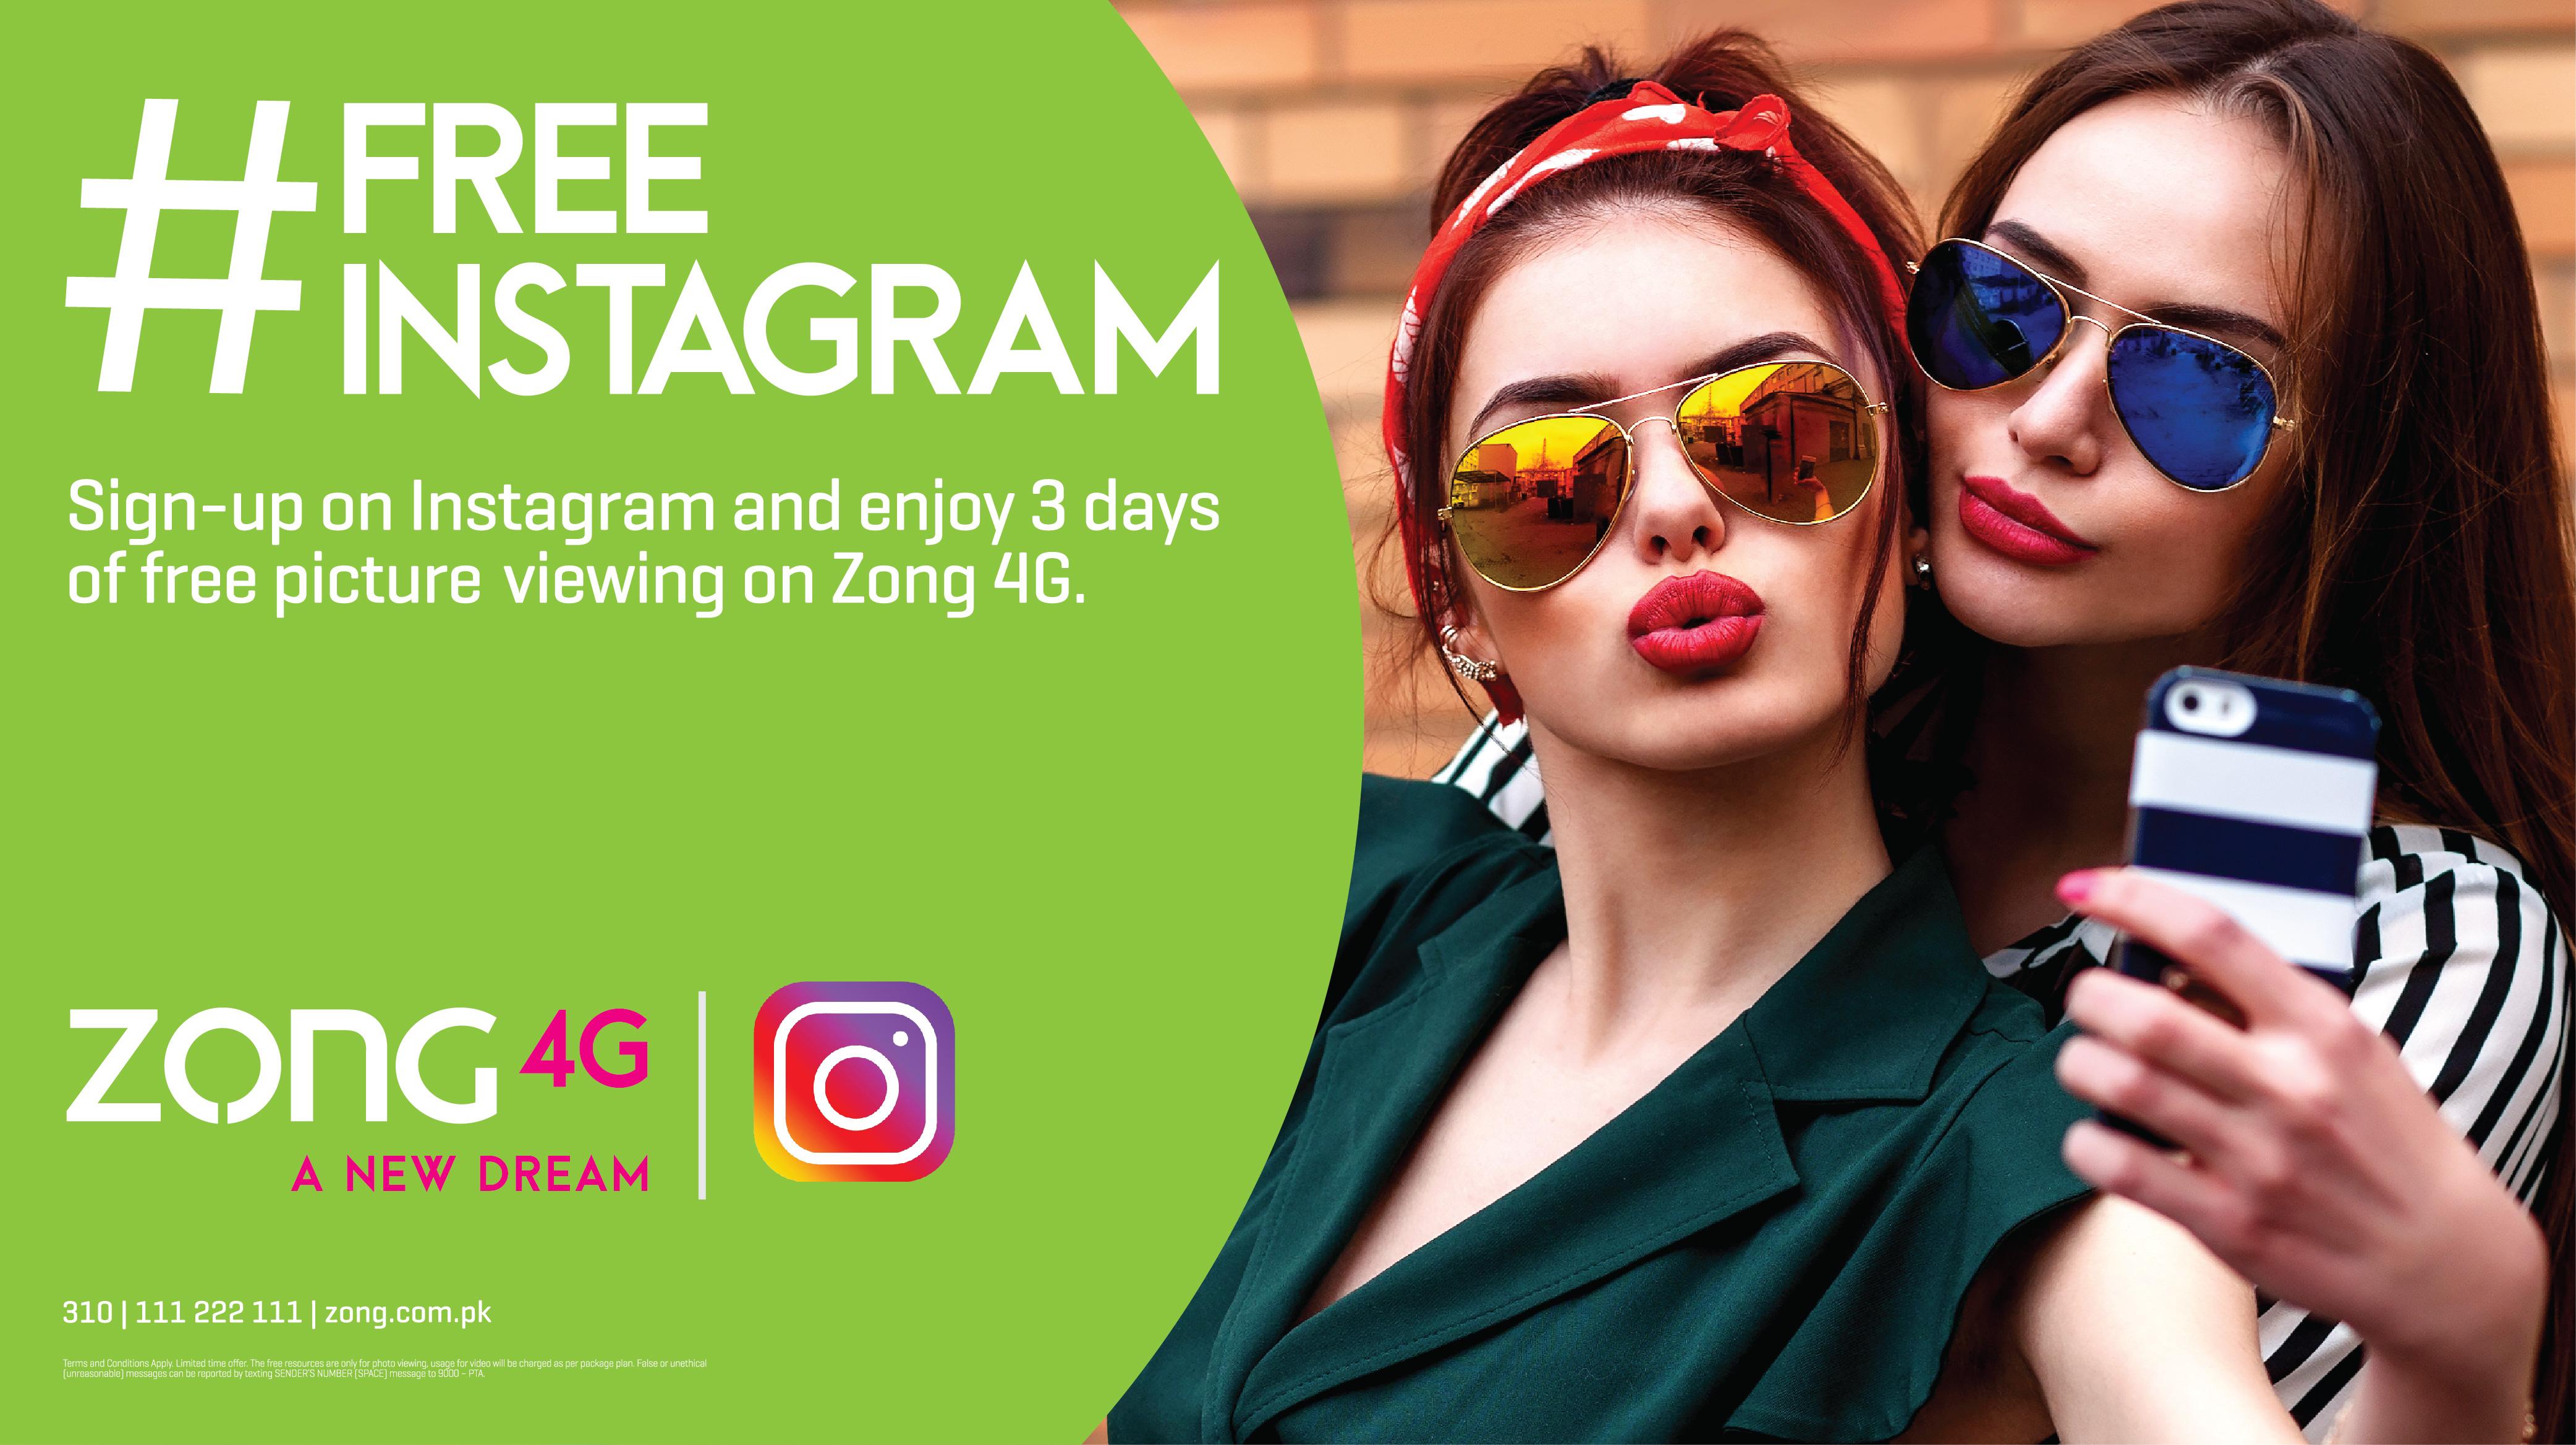 Pakistan’s No. 1 Data Network, Zong 4G partners with Instagram